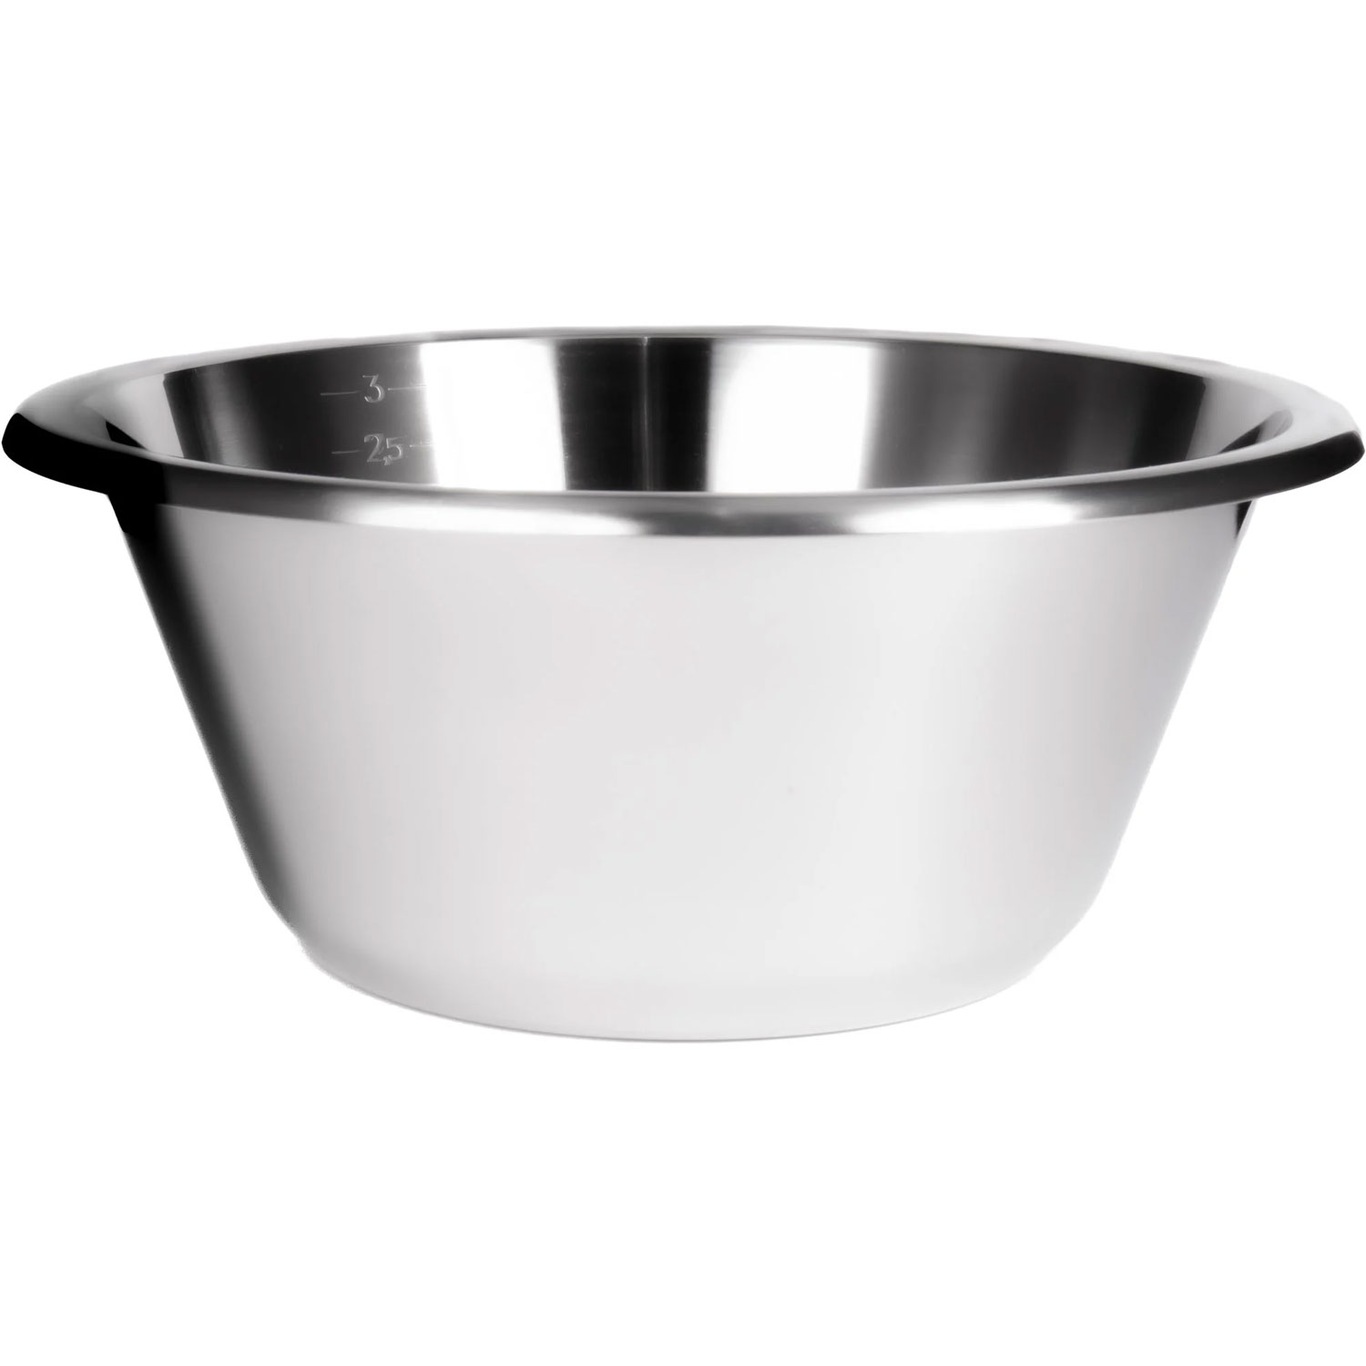 Bowl Stainless Steel, 3 l